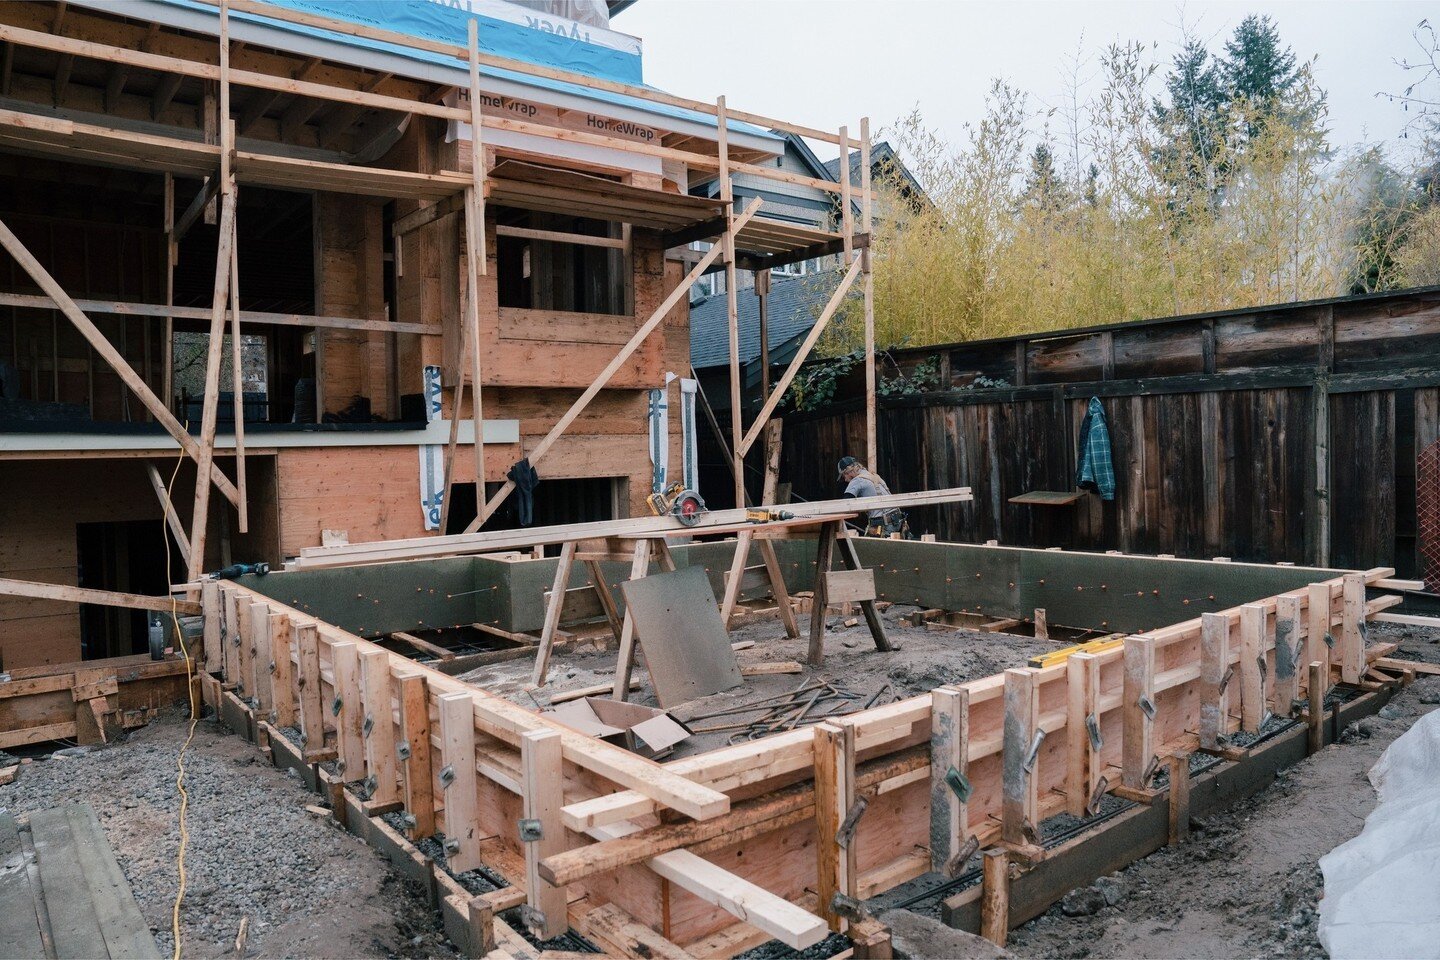 Forty Second. Custom New Build.⁠
⁠
📸  @smalltyler⁠
architect: @keithjakobsen⁠
@lionheartconcreteltd⁠
.⁠
.⁠
.⁠
#nestworksconstruction #construction #concepttocompletion #constructionlife #integrity #quality #value #qualityhomes ⁠
⁠
#britishcolumbia #